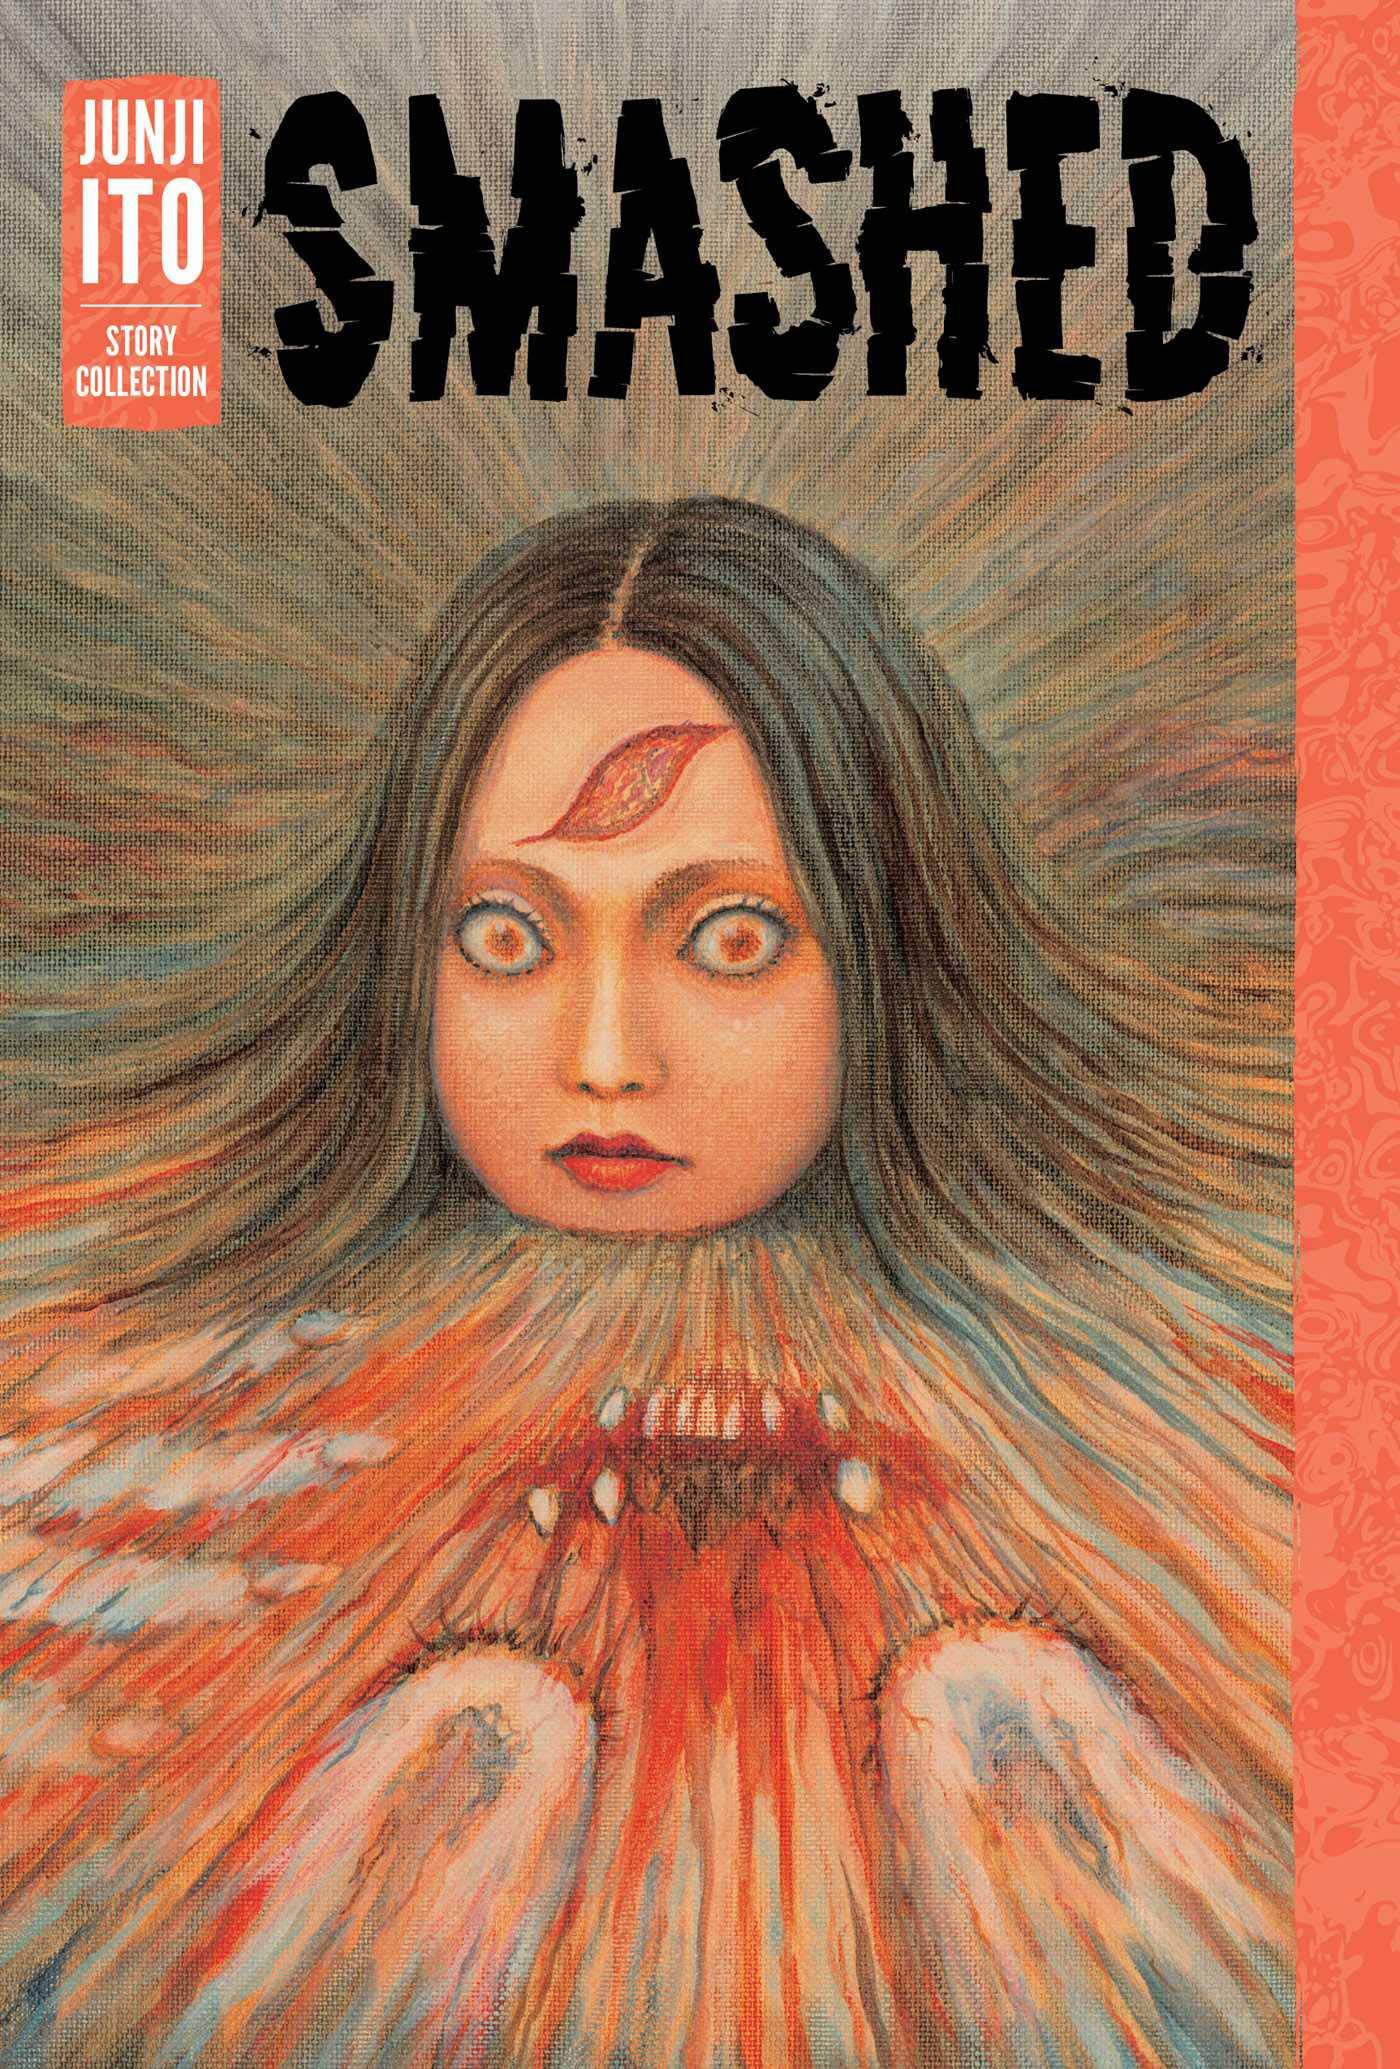 Smashed: A Junji Ito Story Collection (MR) (C: 1